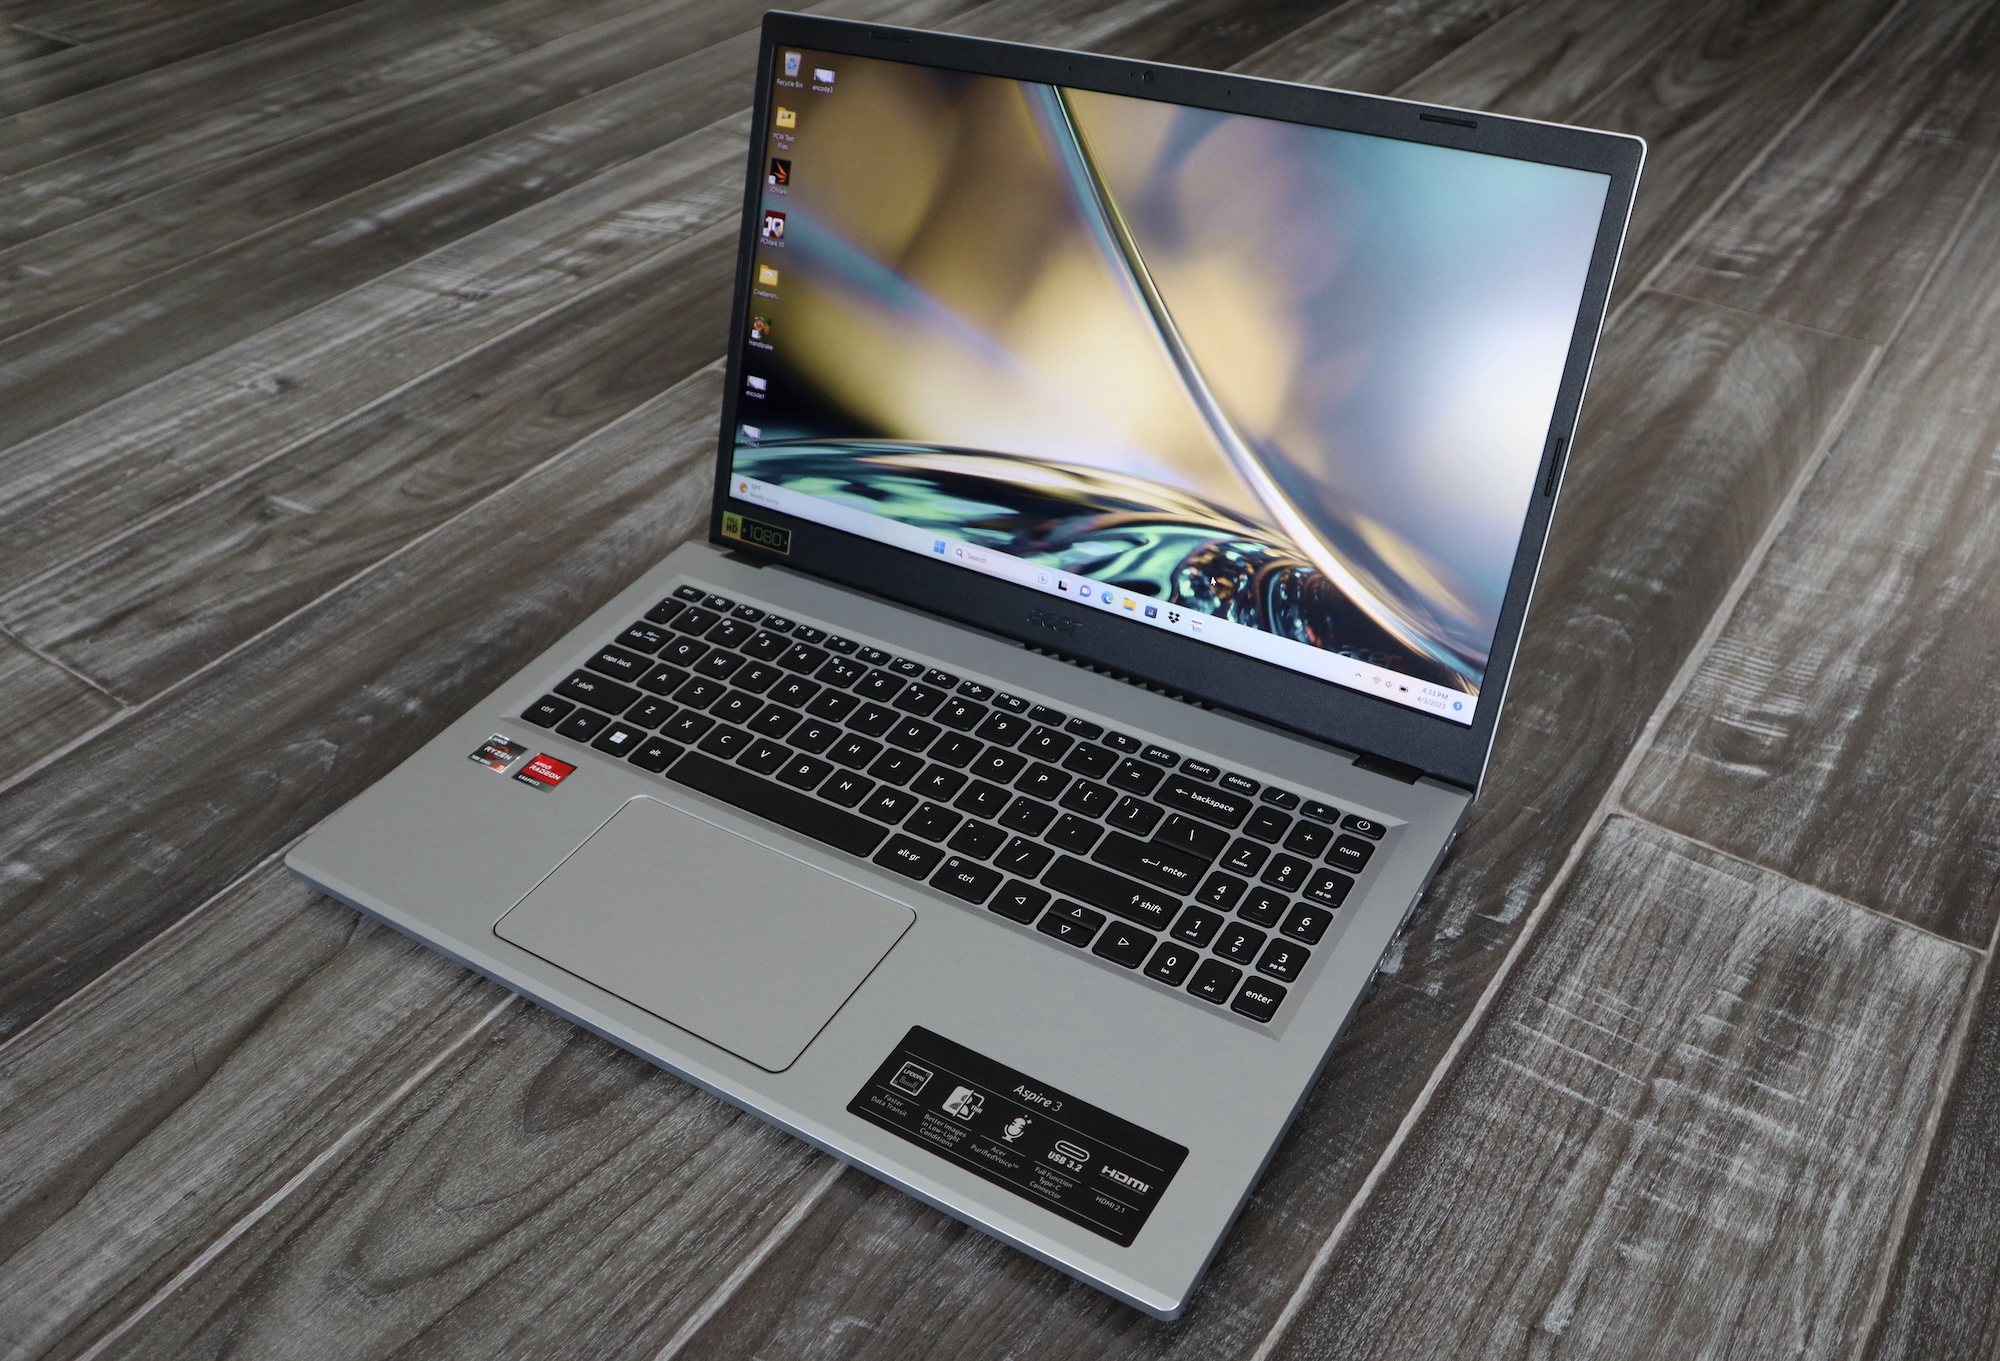 Simplest laptops below $500 in 2024: Simplest overall, handiest OLED laptop, and more